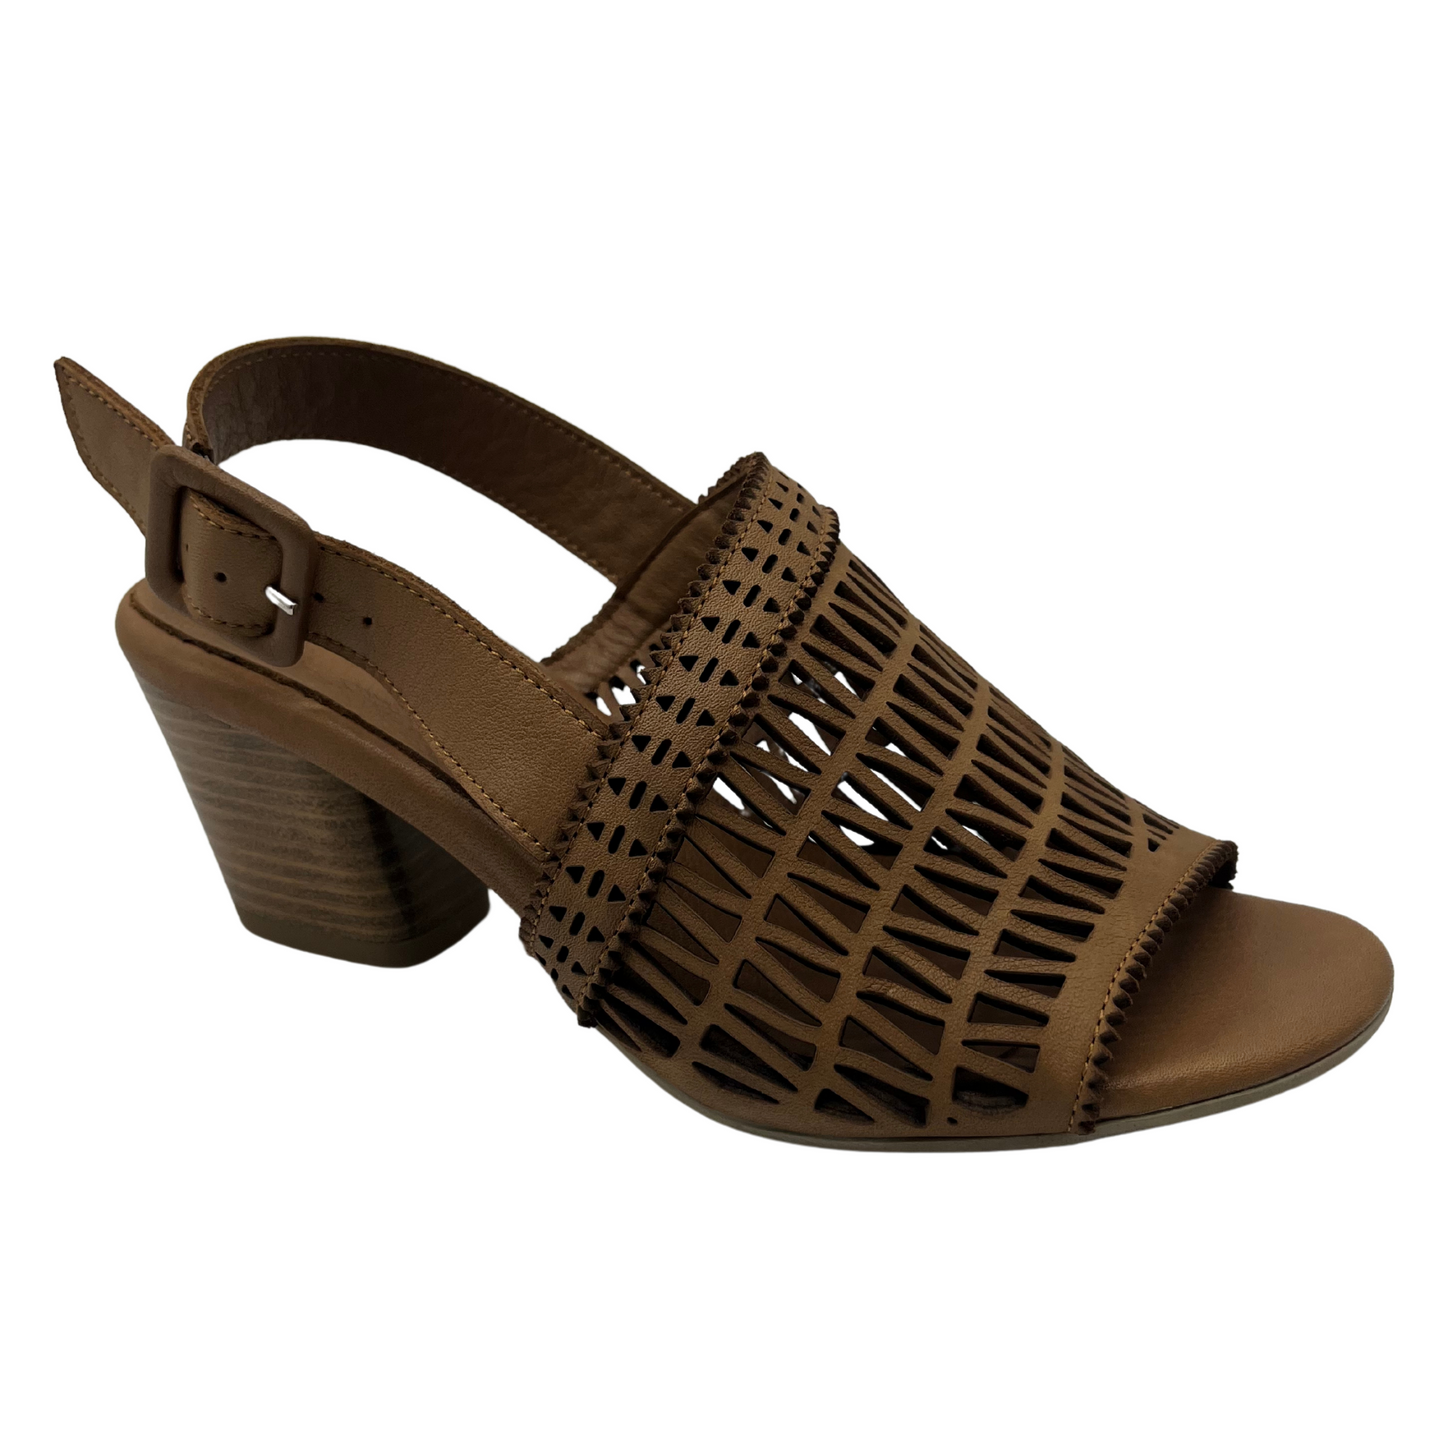 45 degree angled view of brown leather sandal with block heel and cut out detail